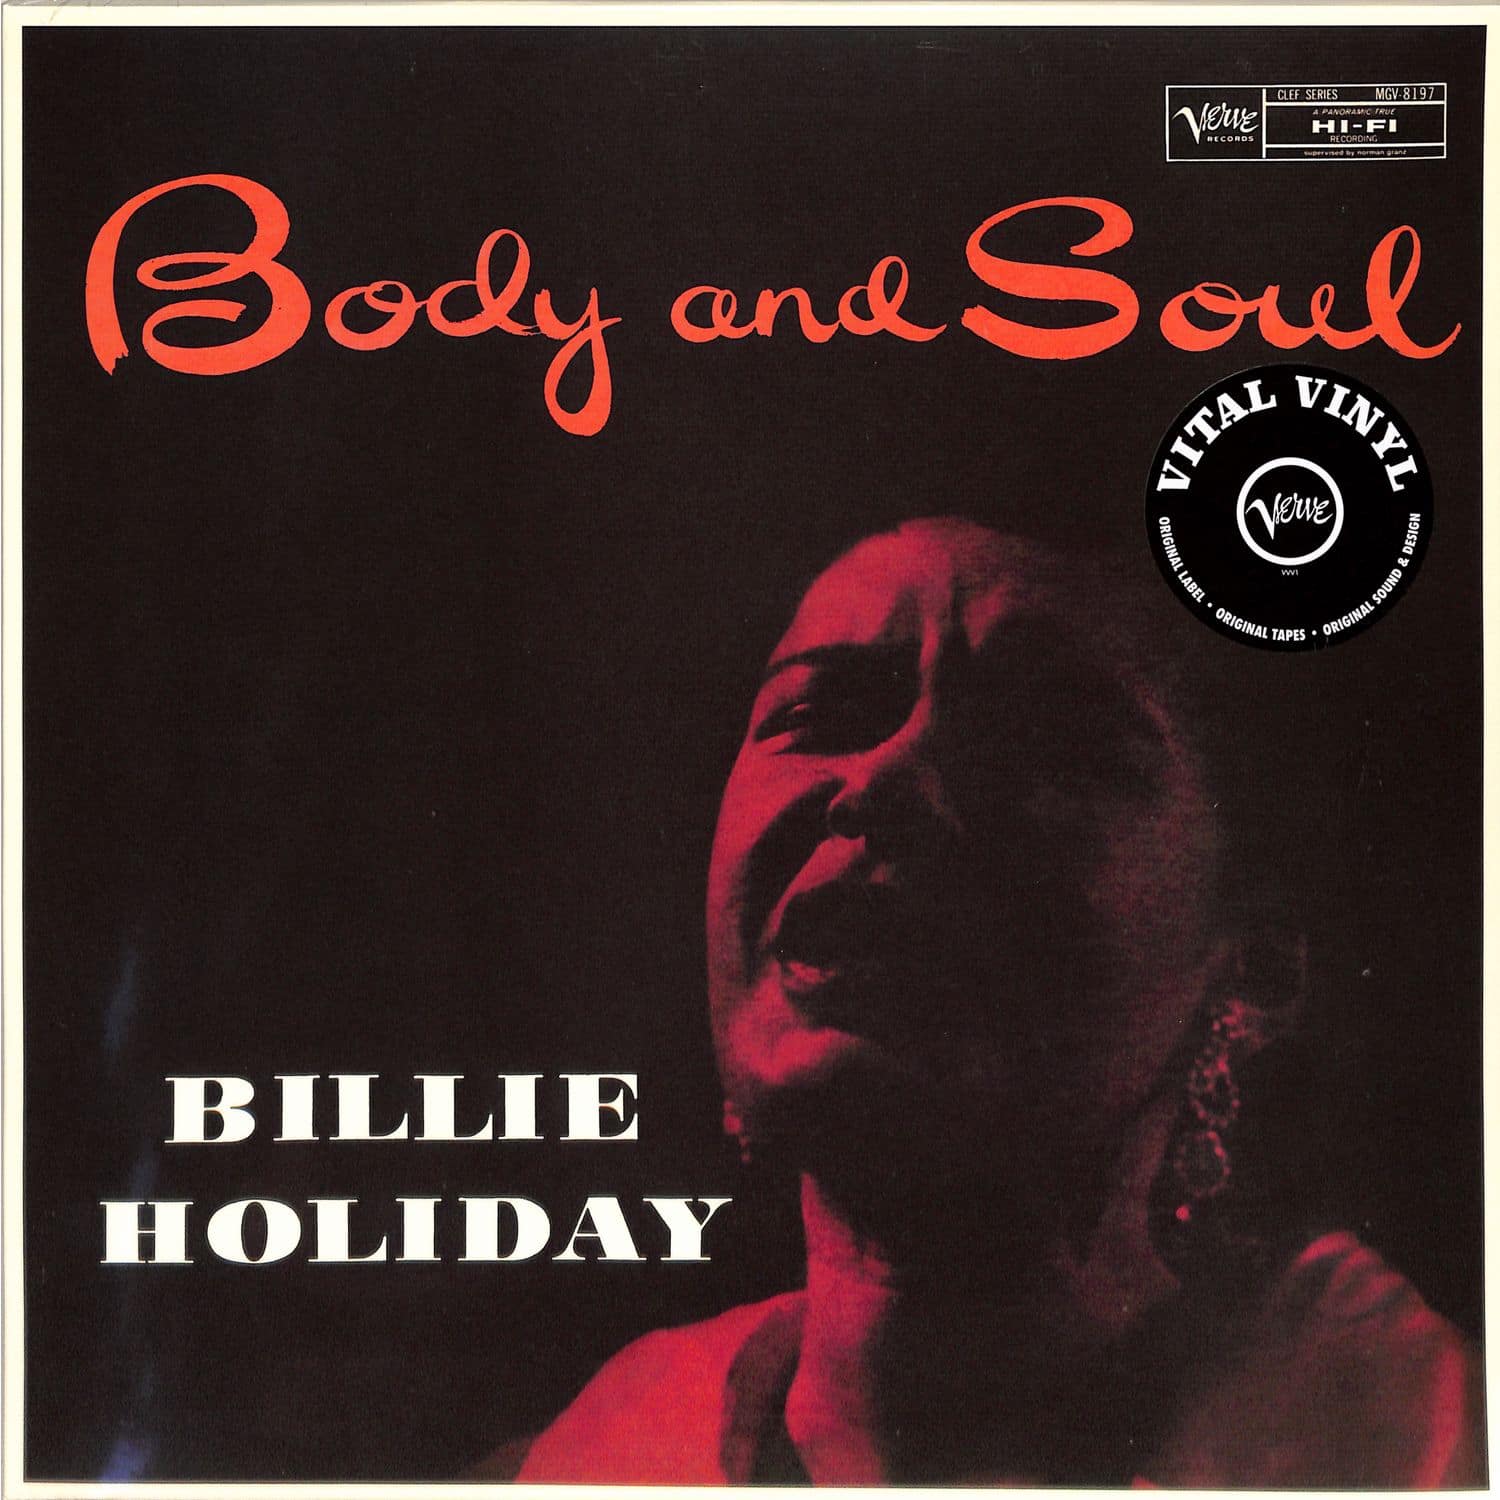 Billie Holiday - BODY AND SOUL 